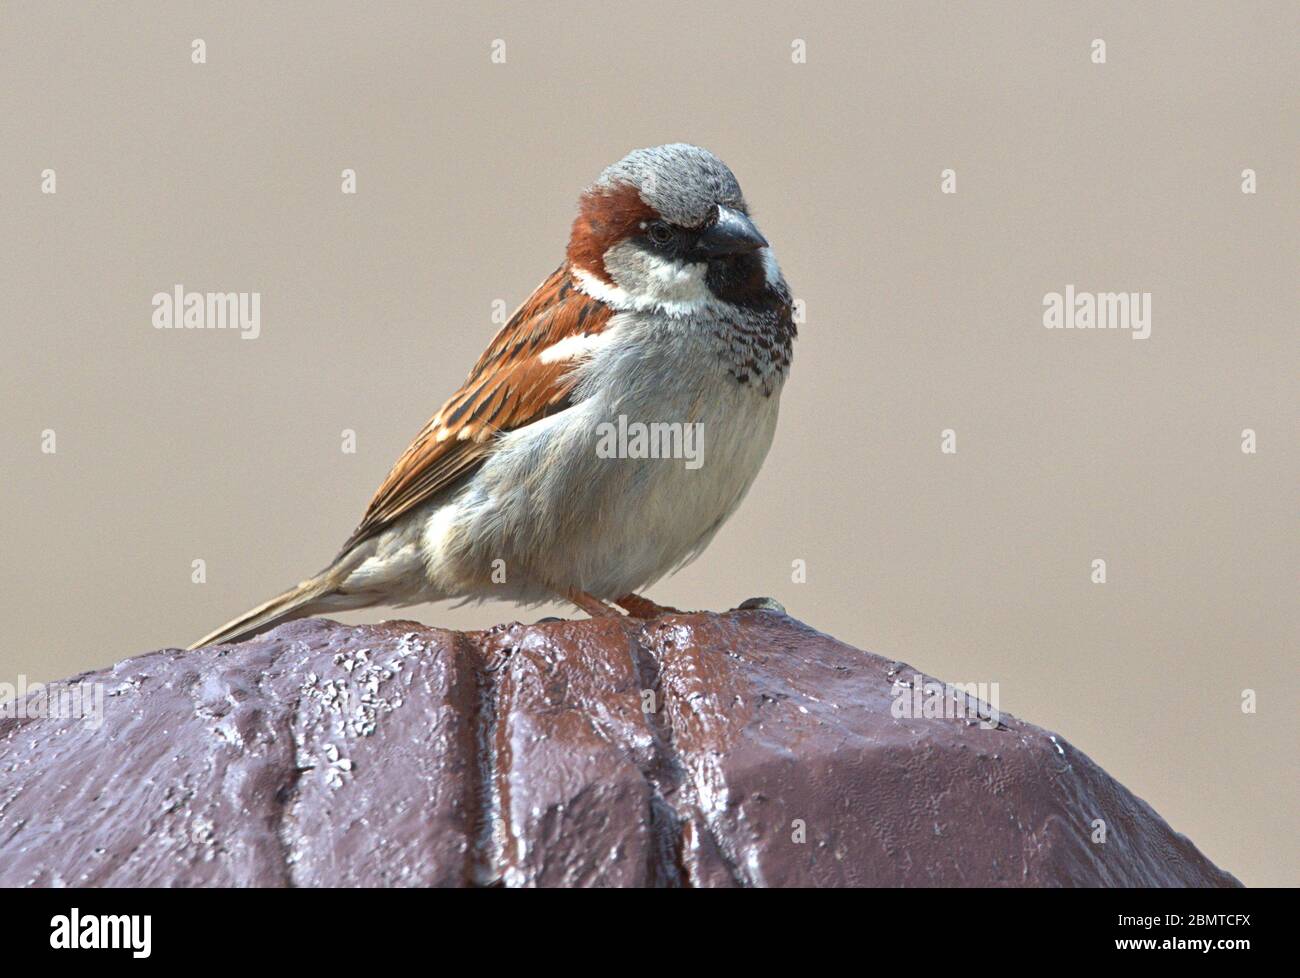 Schleswig, Deutschland. 10th May, 2020. 10.05.2020, Schleswig, a male house sparrow (Passer domesticus) sits relaxed on a wooden figure. Order: Sparrowbird (Passeriformes), subordination: Songbird (Passeri), superfamily: Passeroidea, family: Sparrow (Passeridae), genus: Passer, species: house sparrow | usage worldwide Credit: dpa/Alamy Live News Stock Photo